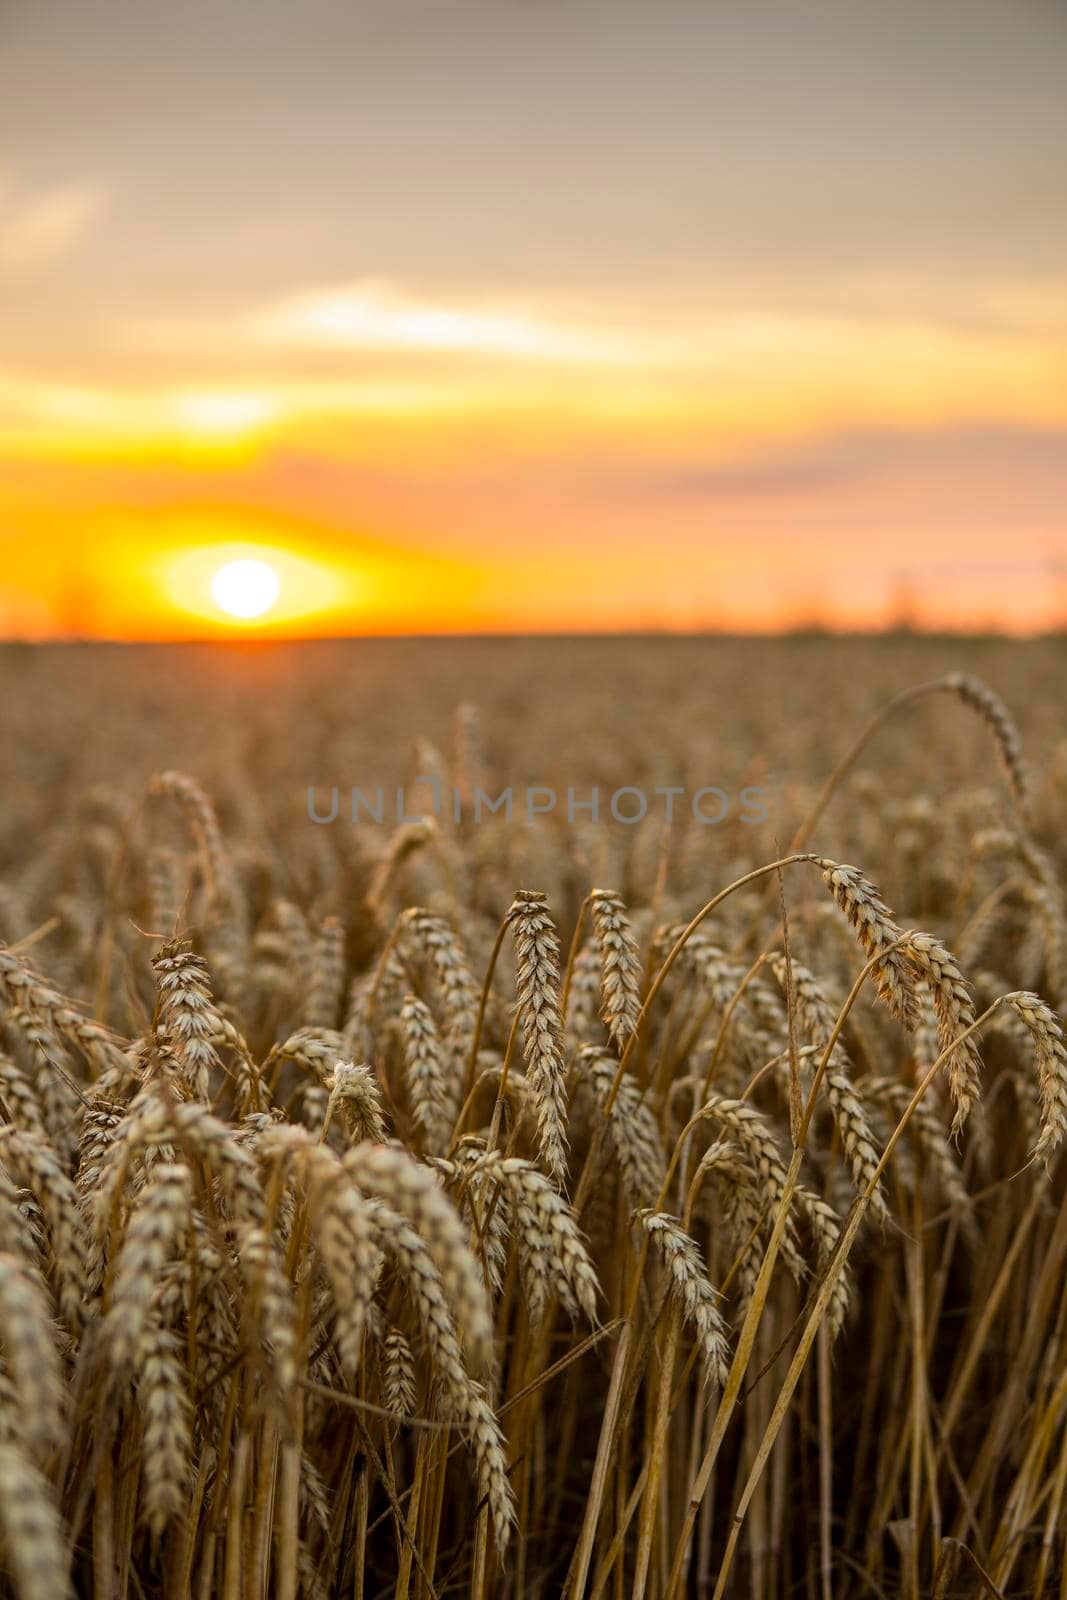 Majestic sunset over a wheat field. Wheat ears under sunshine at sunset. Wonderful rural landscape. by vovsht